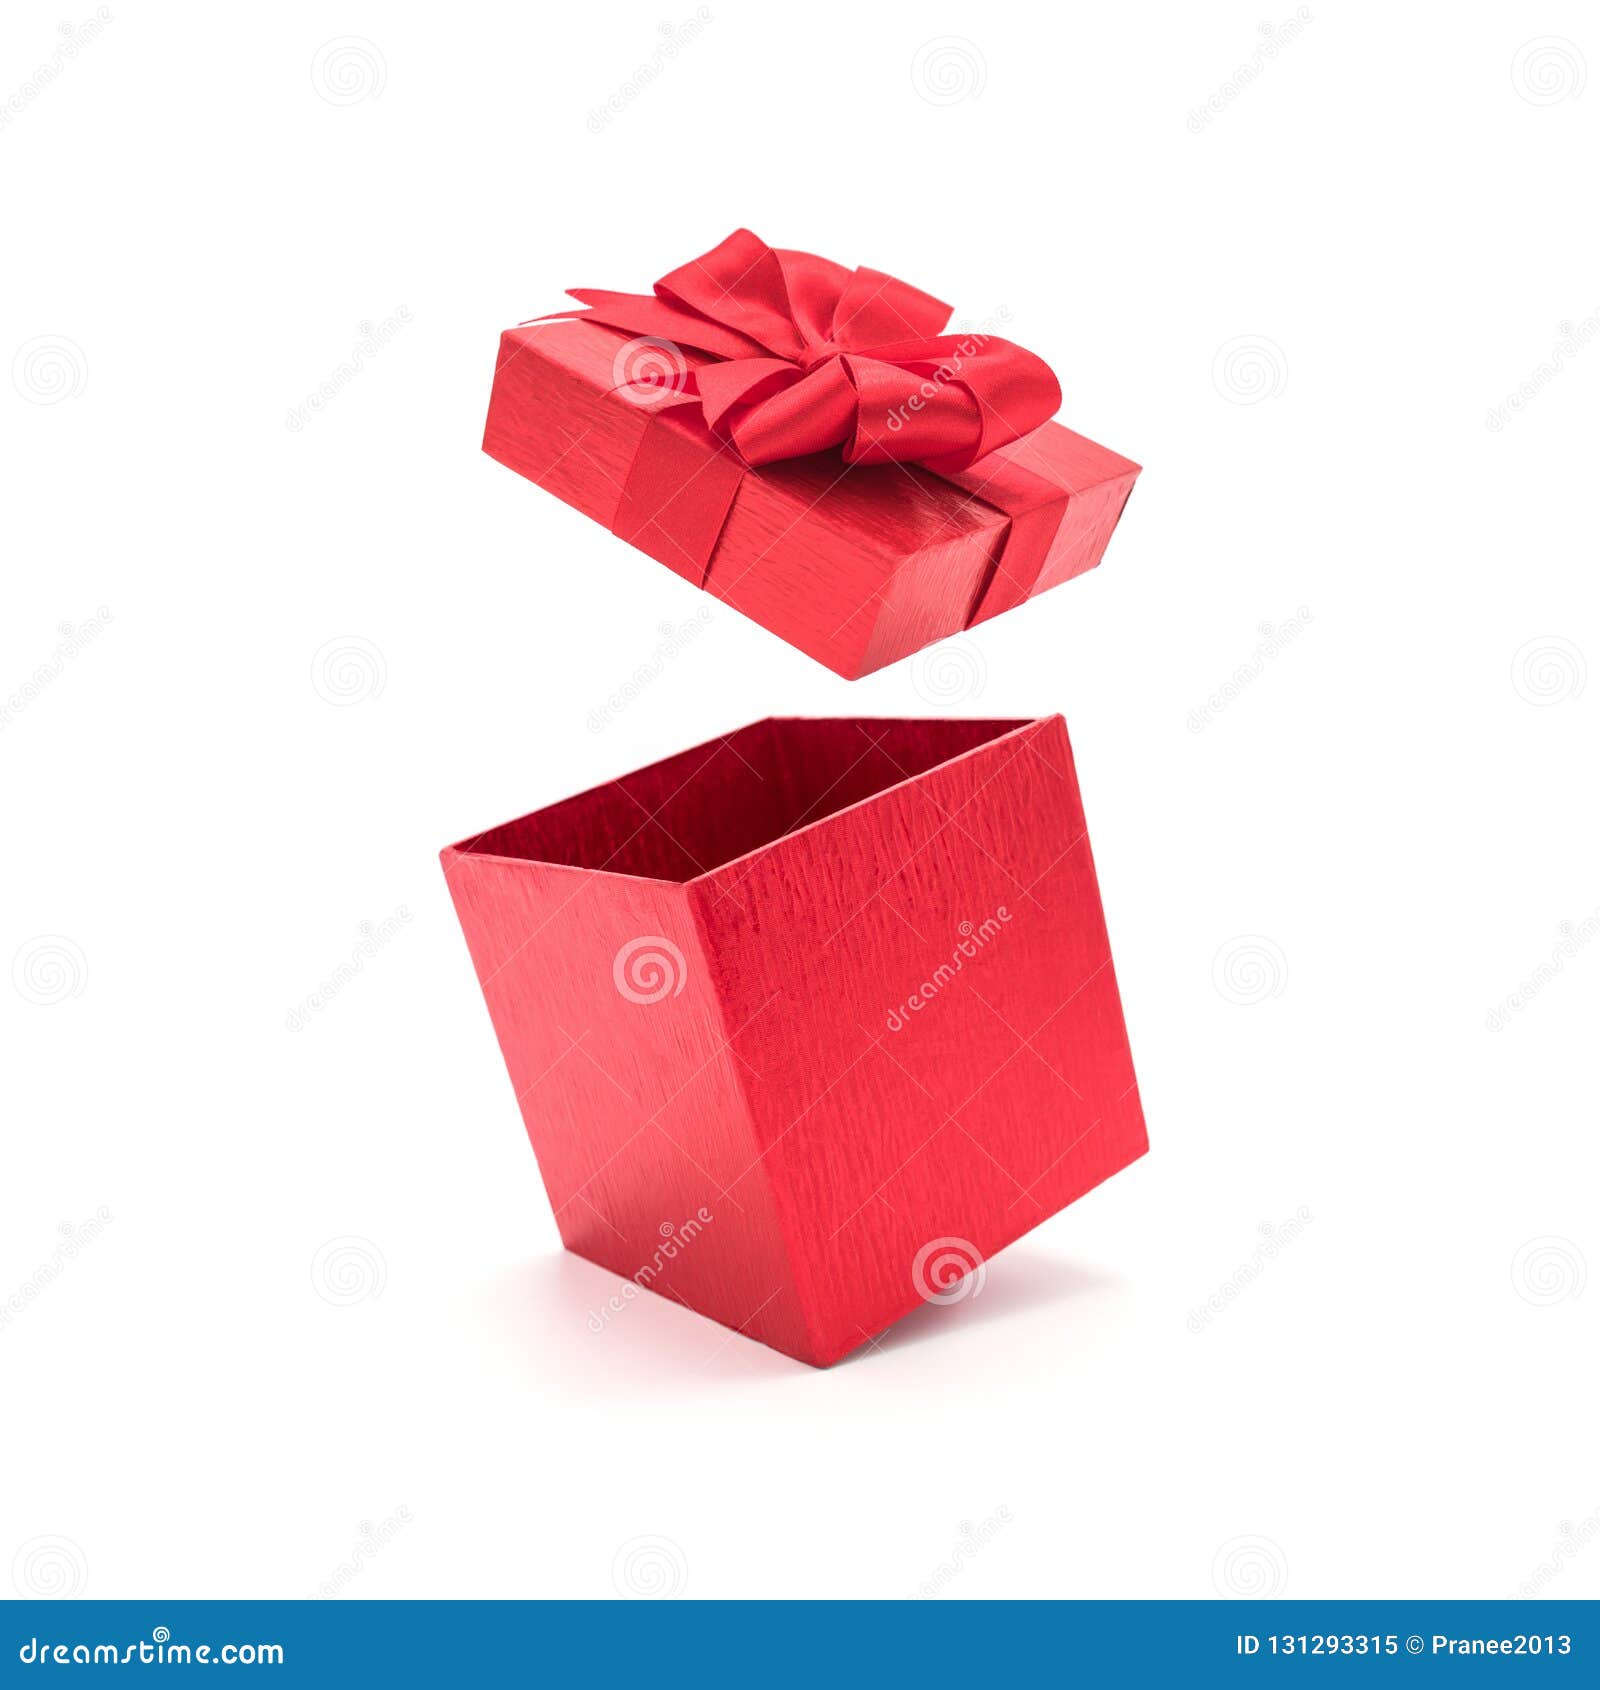 Red gift box open. stock image. Image of package